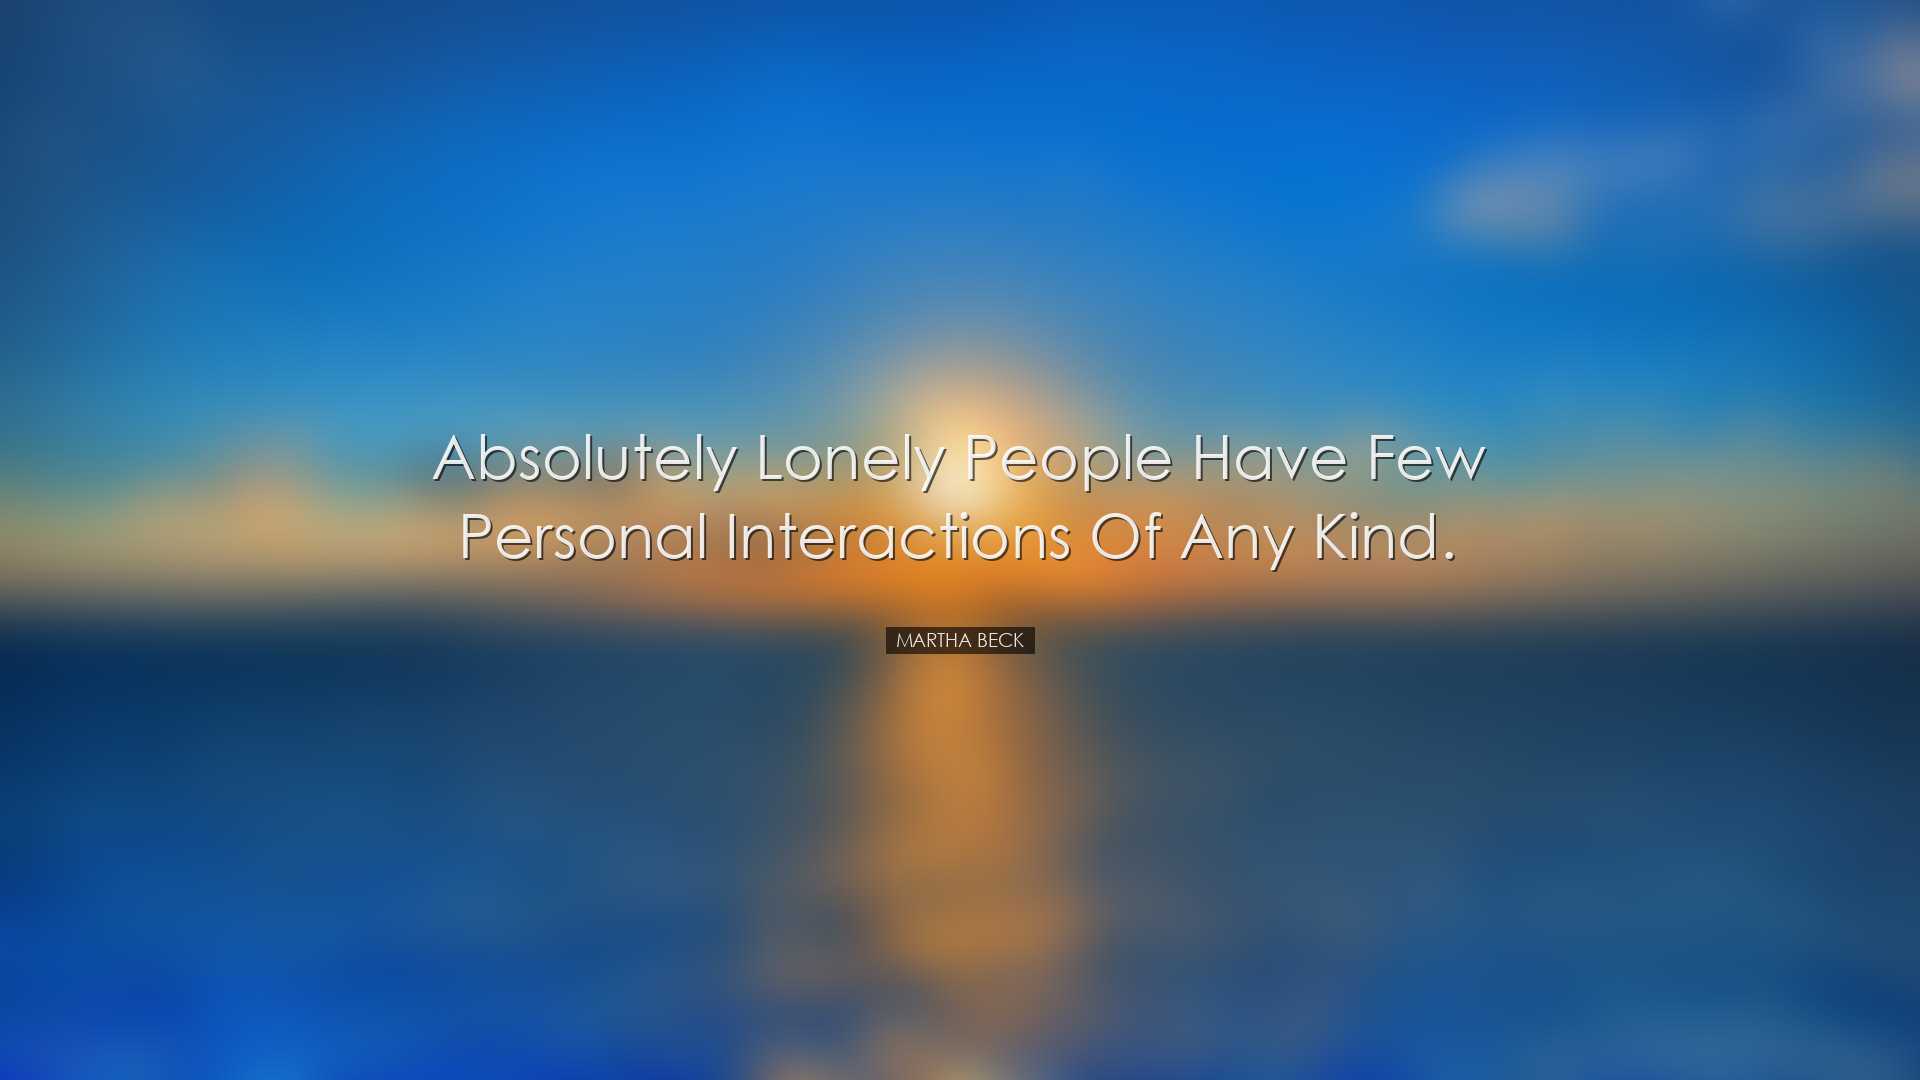 Absolutely lonely people have few personal interactions of any kin